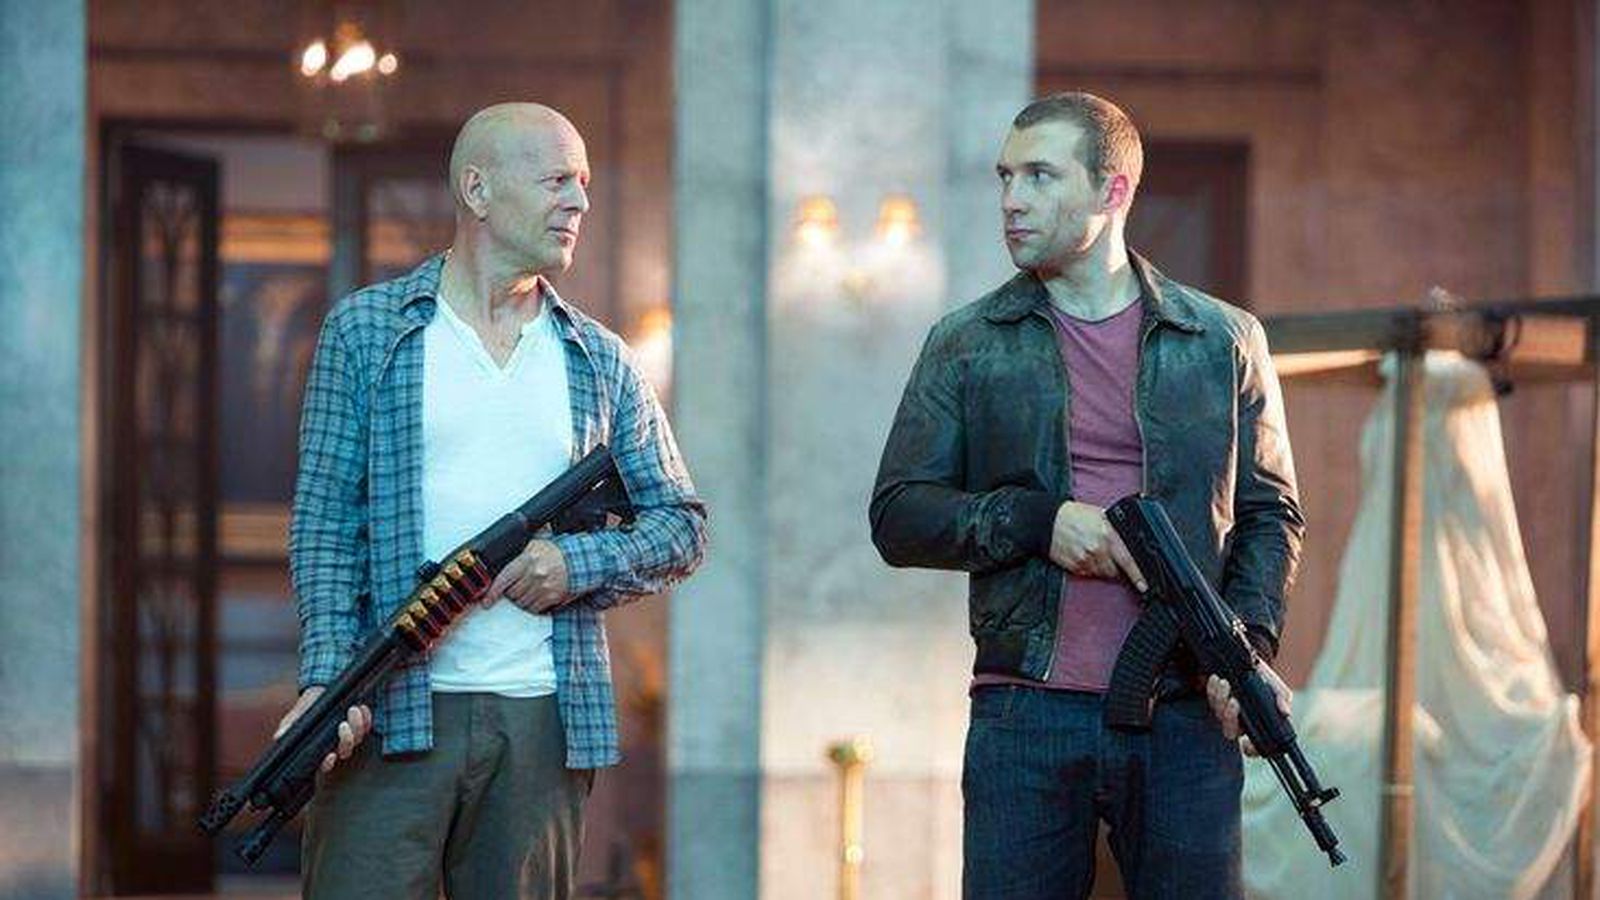 Review: 'A Good Day to Die Hard' shows no life left in franchise